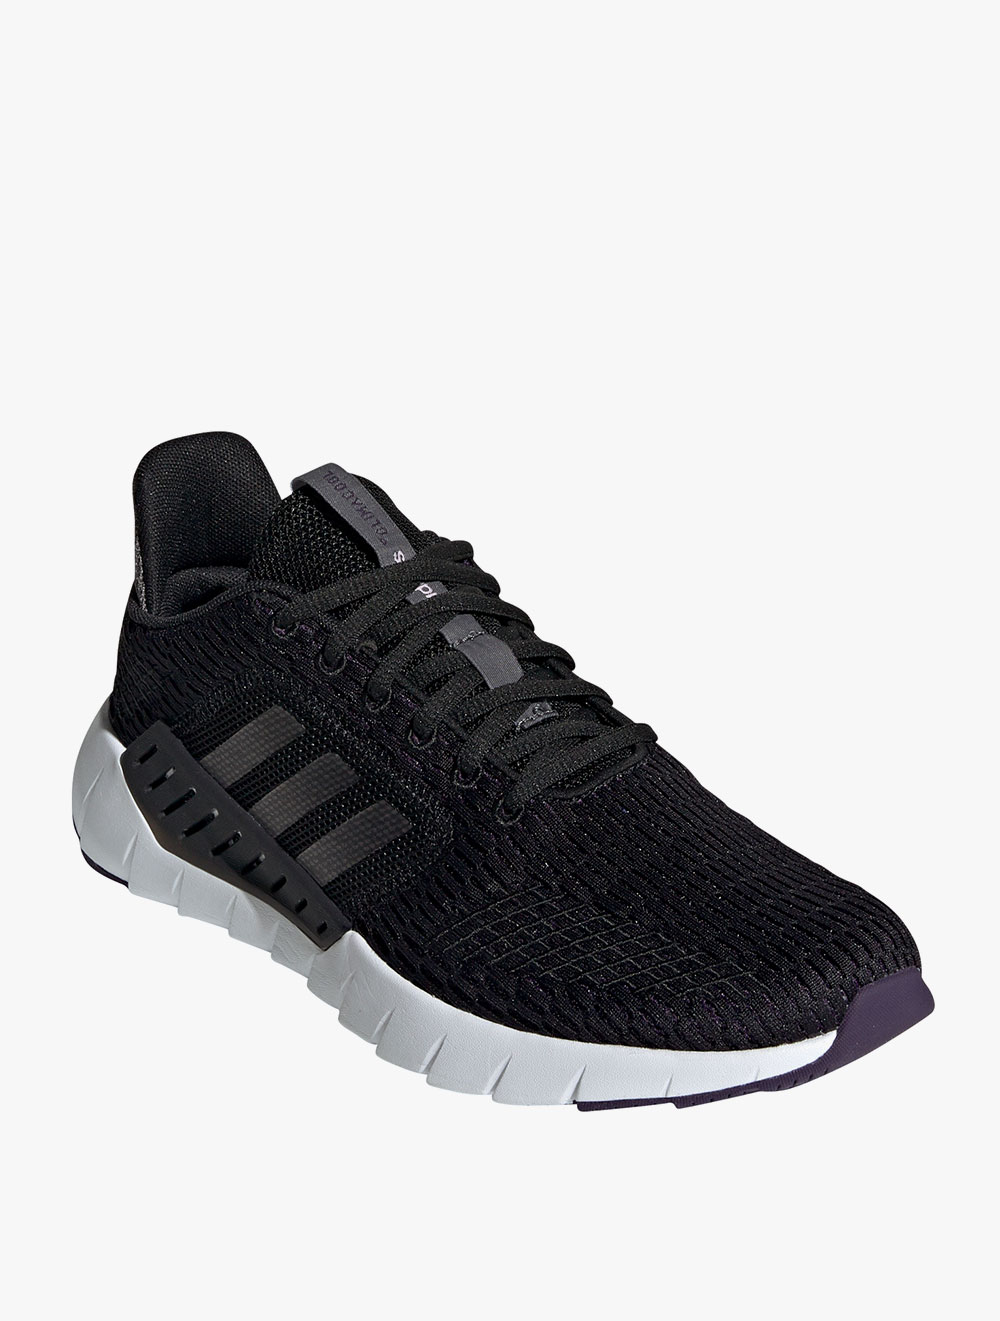 asweego climacool shoes